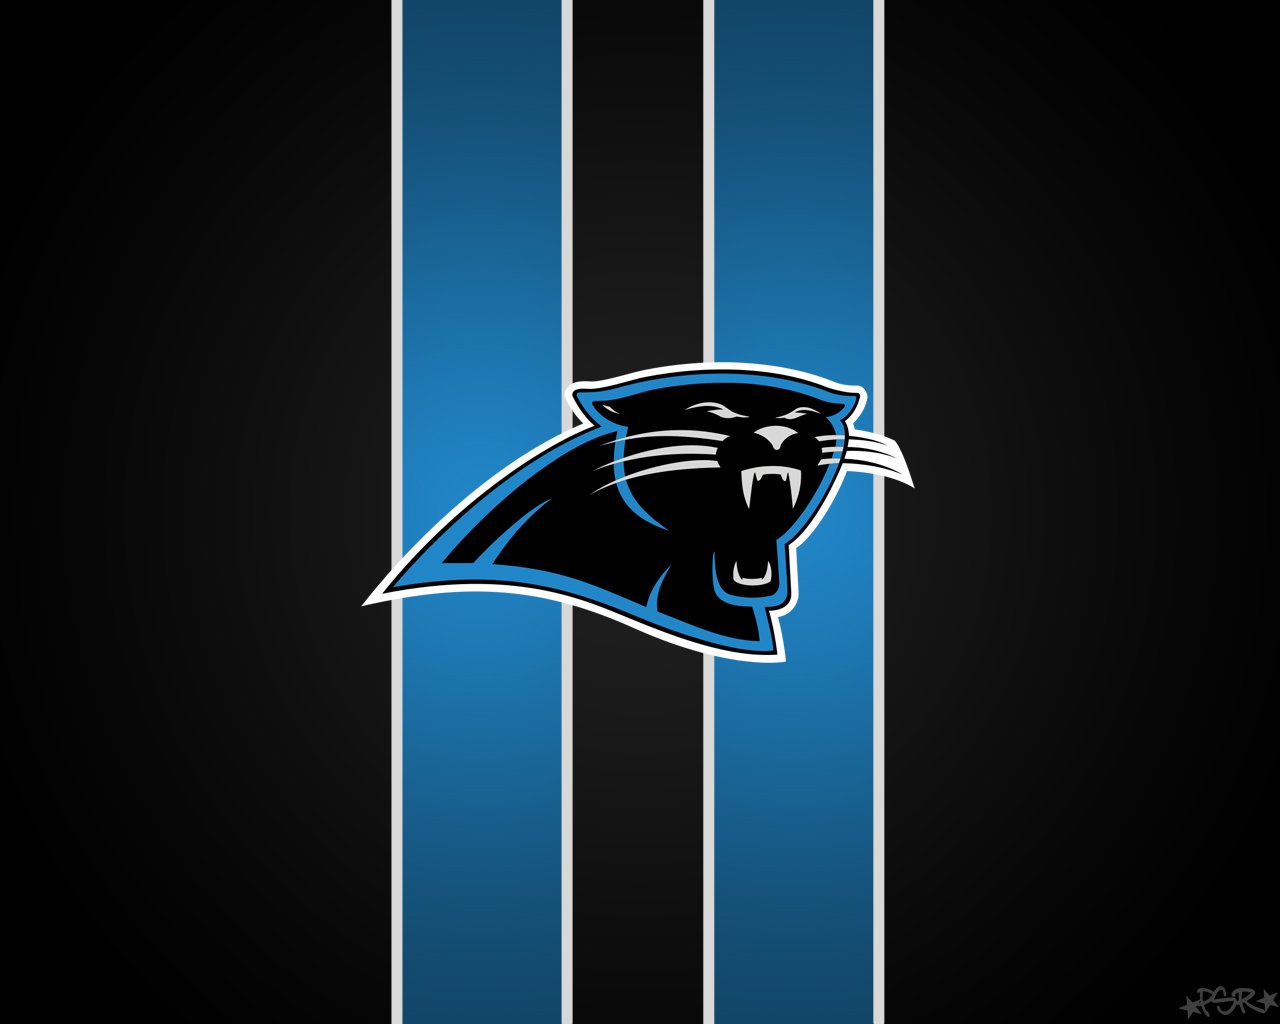 Panthers Logo with Stripes on Black Background by pasar3 1280 x 1280x1024